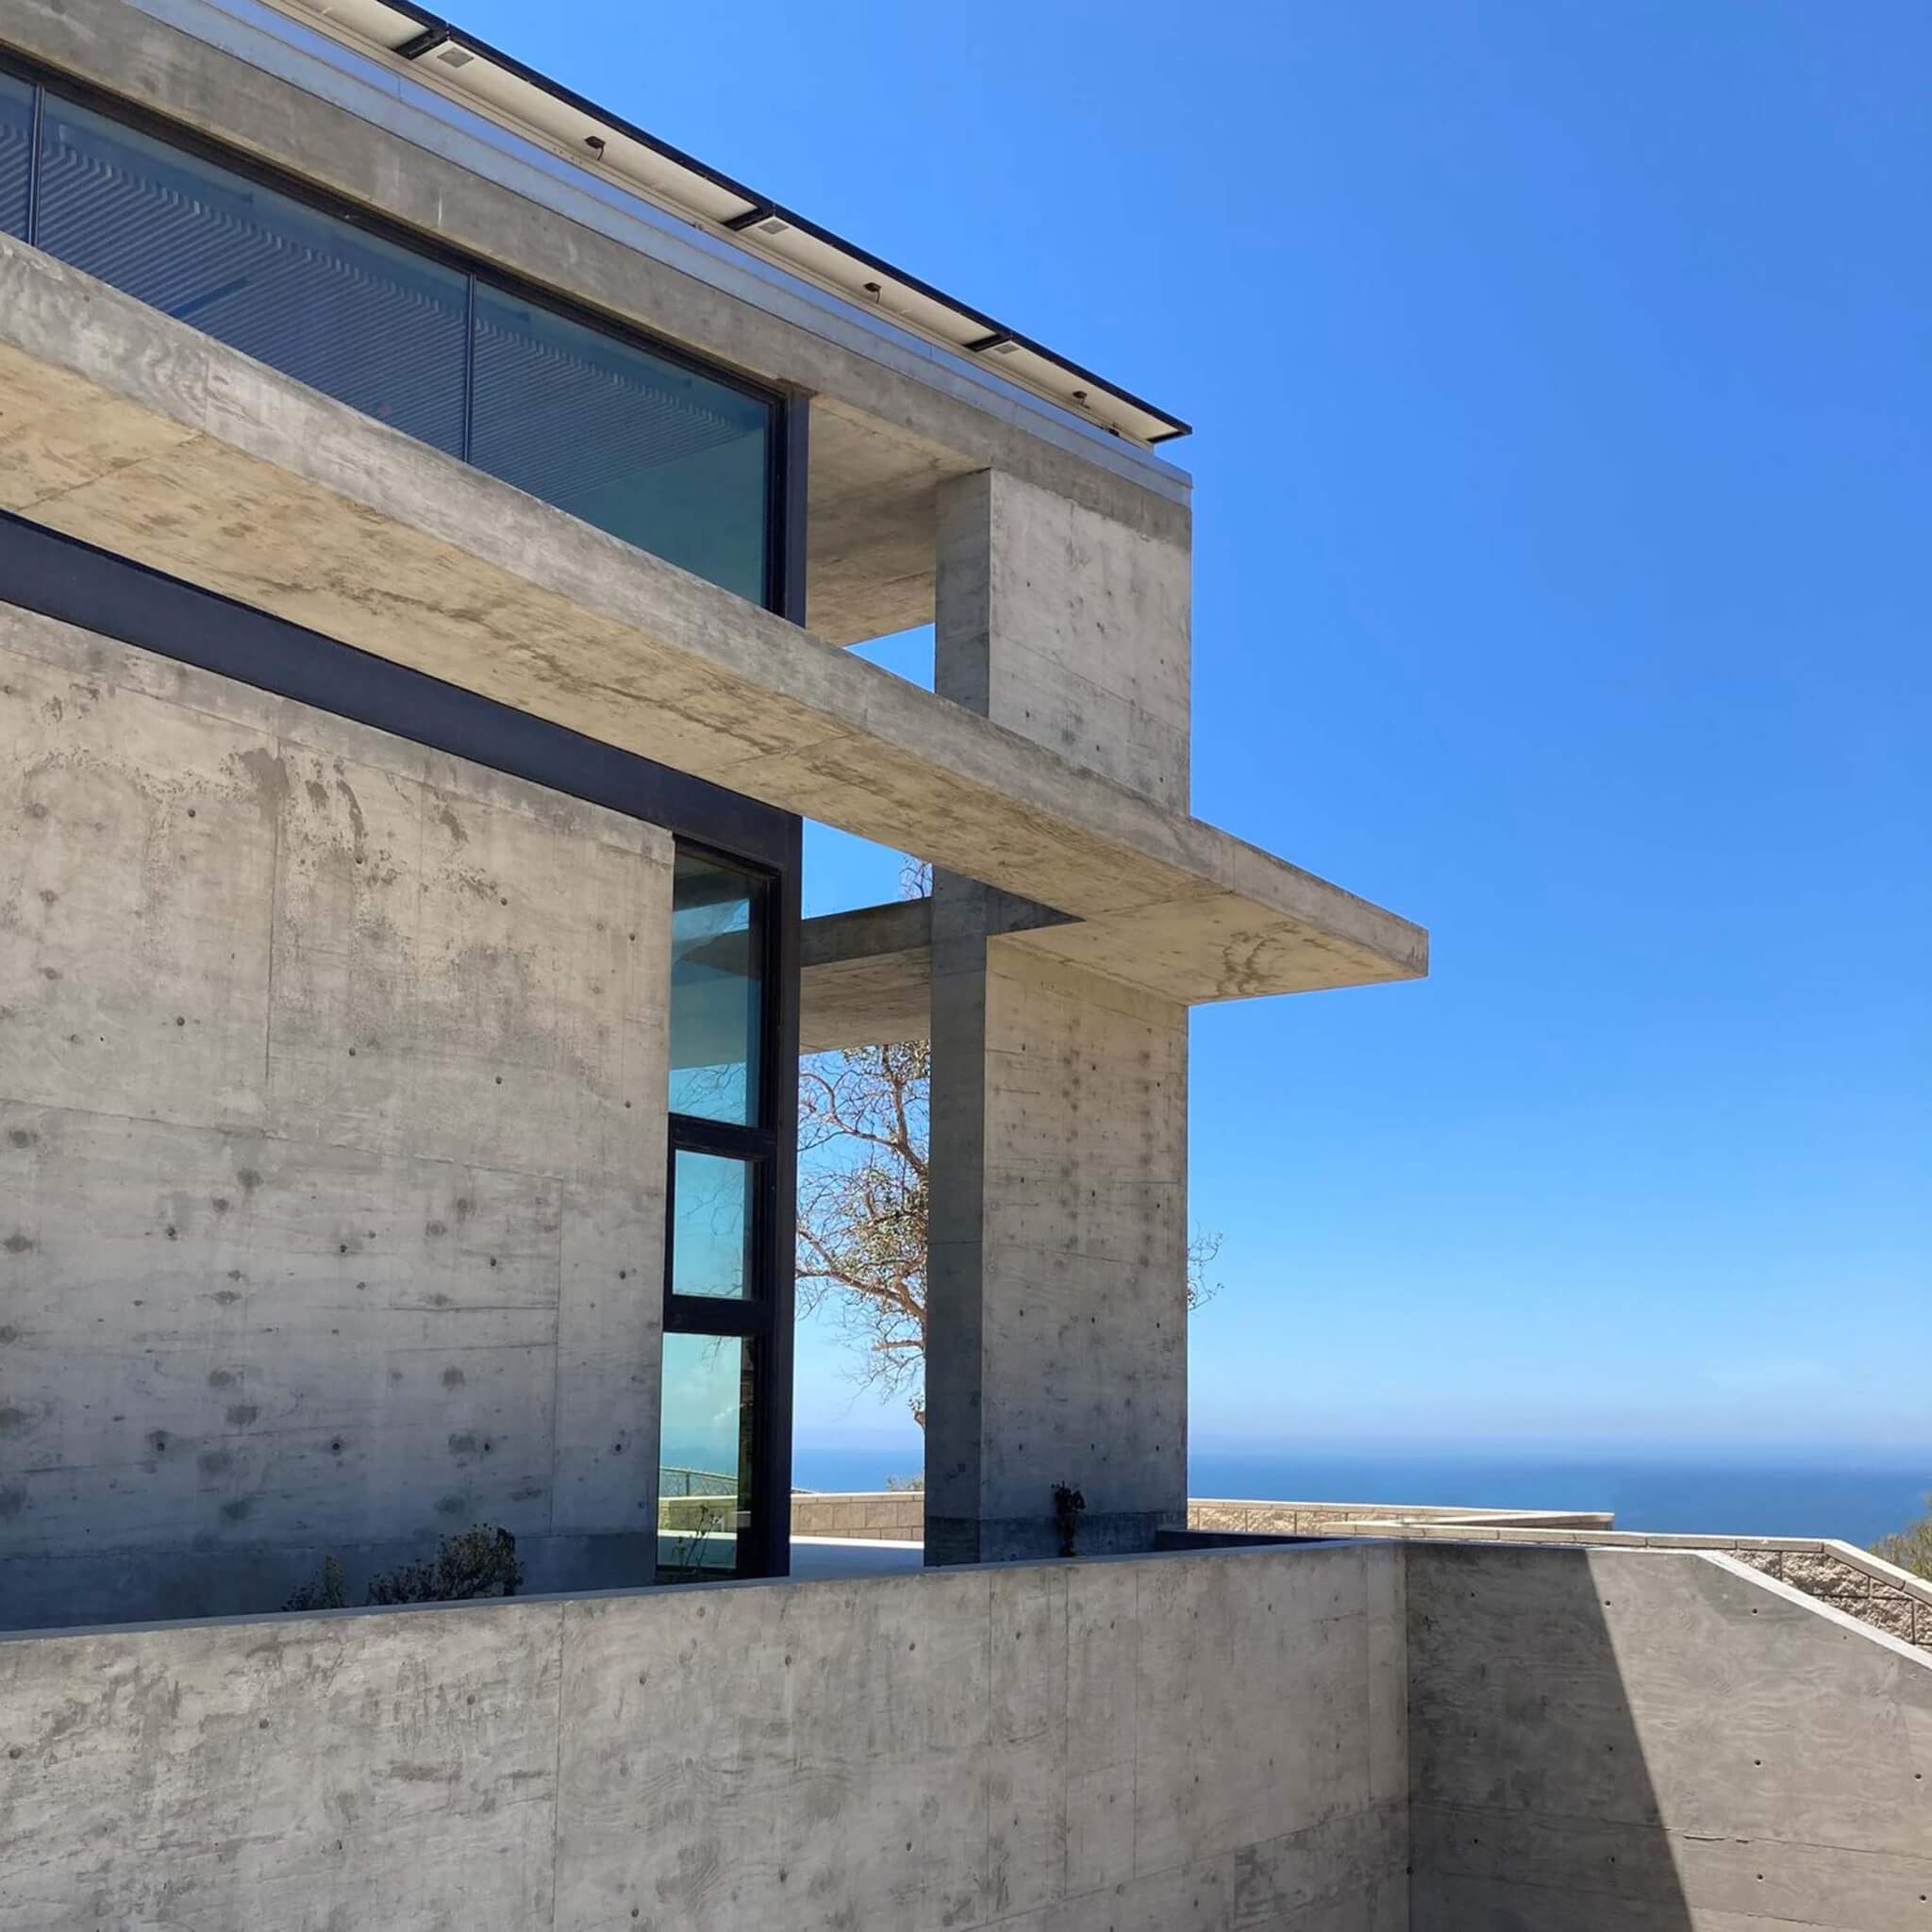 concrete house with deck overlooking blue sky and ocean